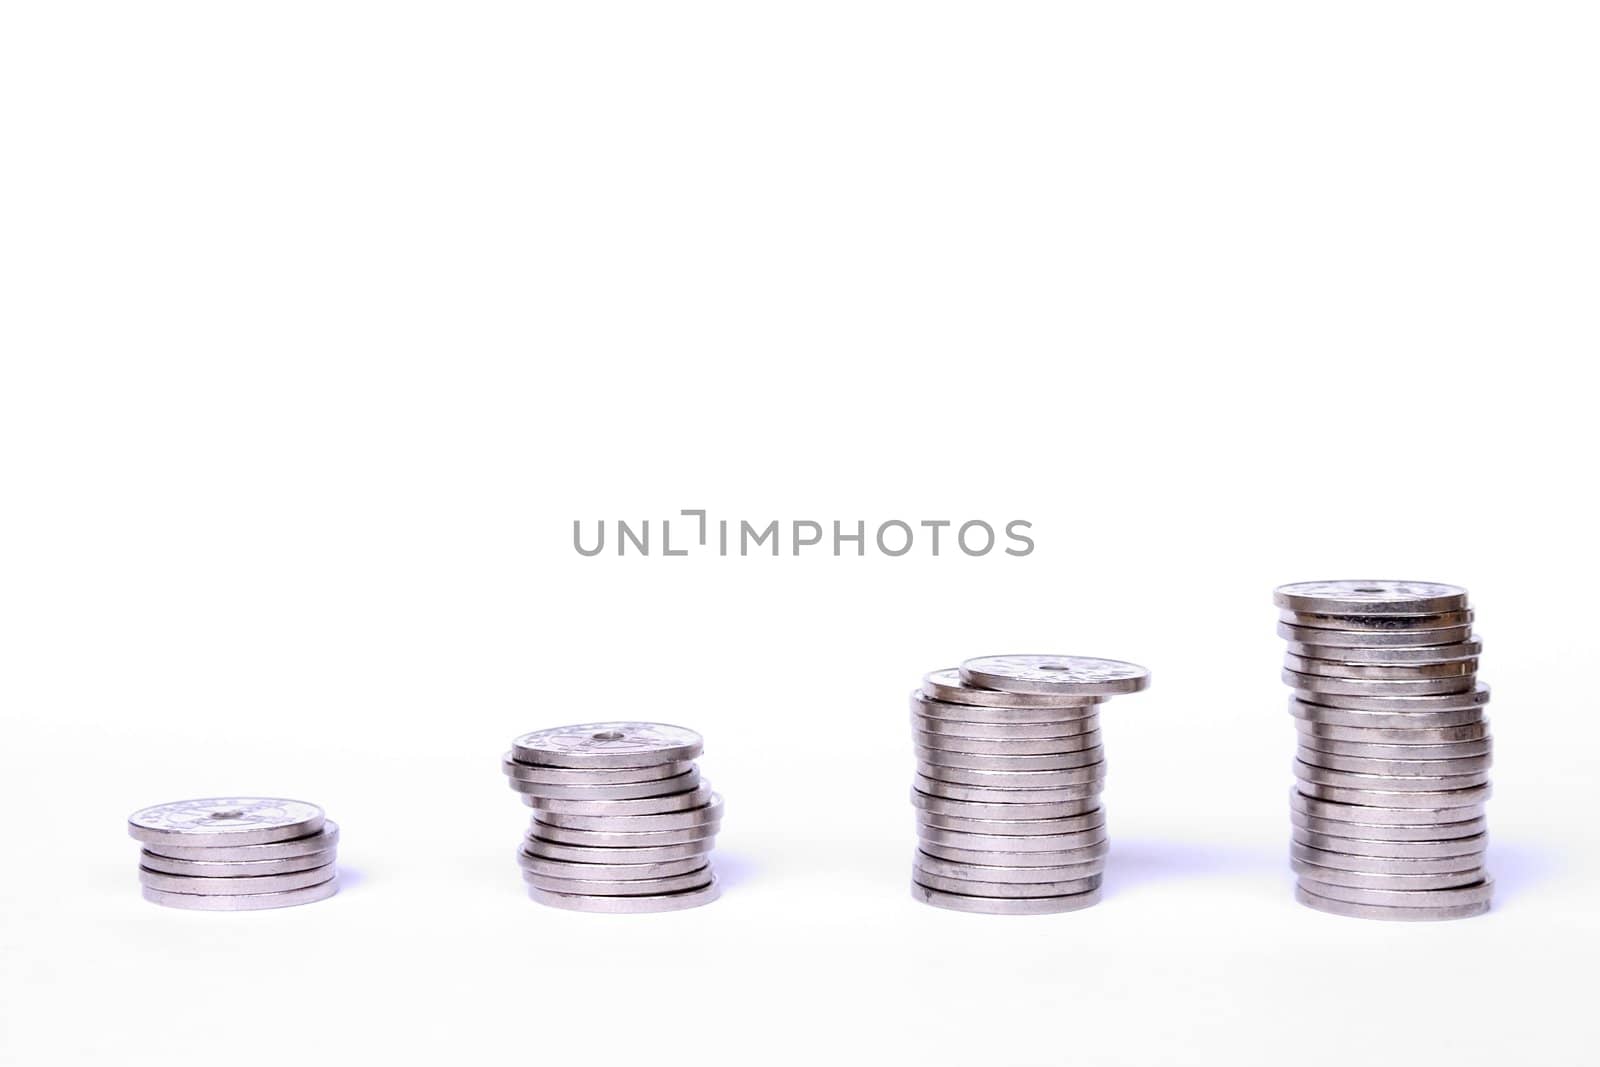 Stacks of coins on white background. Norwegian coins used in the picture.